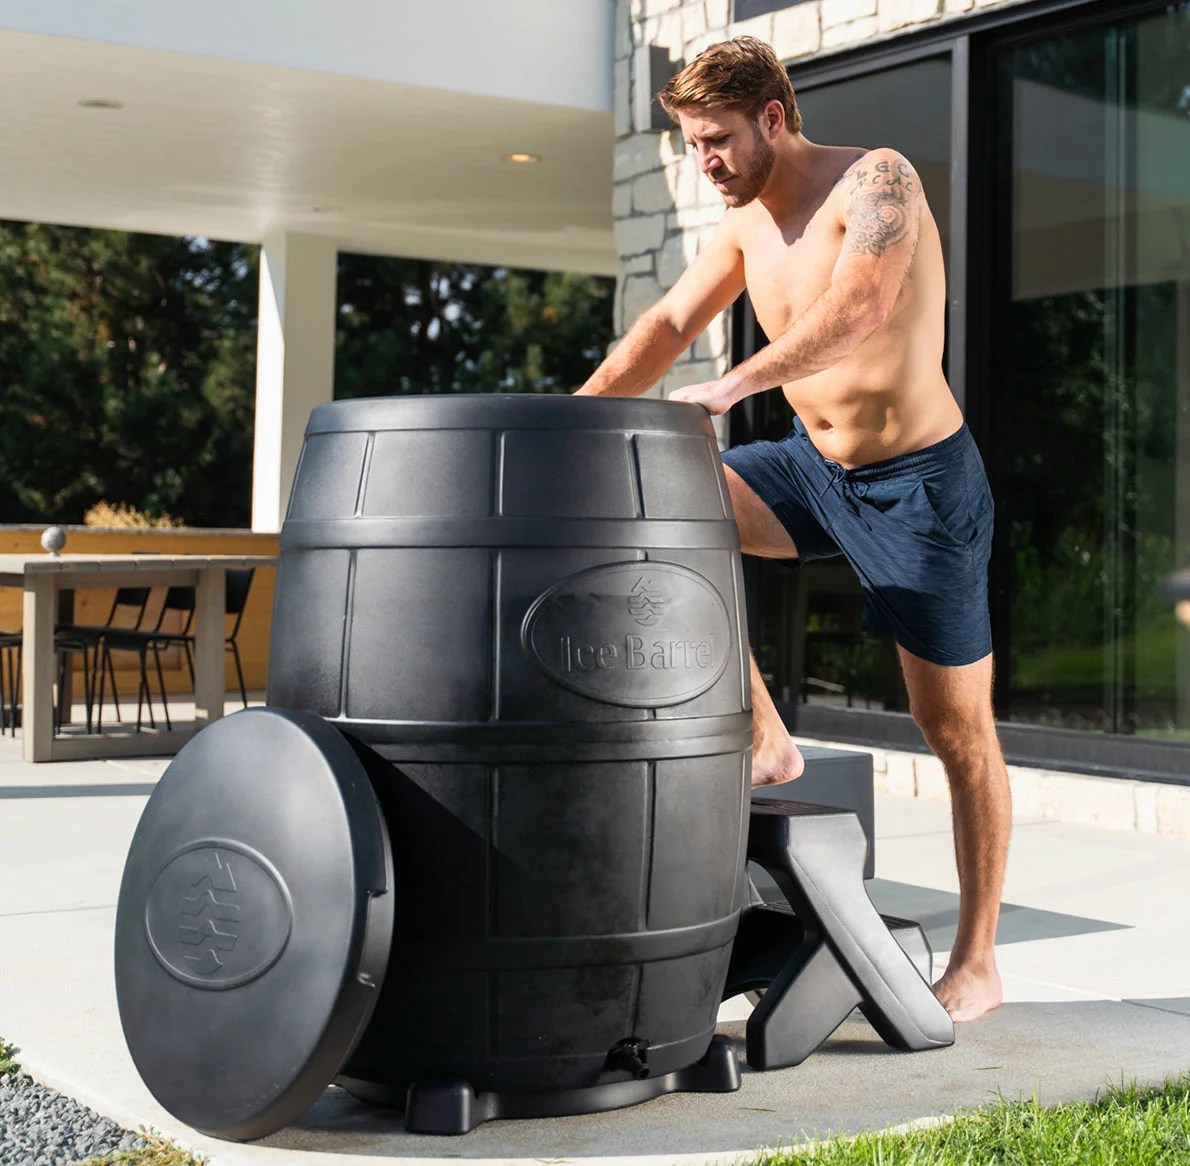 Best Outdoor Ice Bath + LID +COVER + THERMOMETER for sale